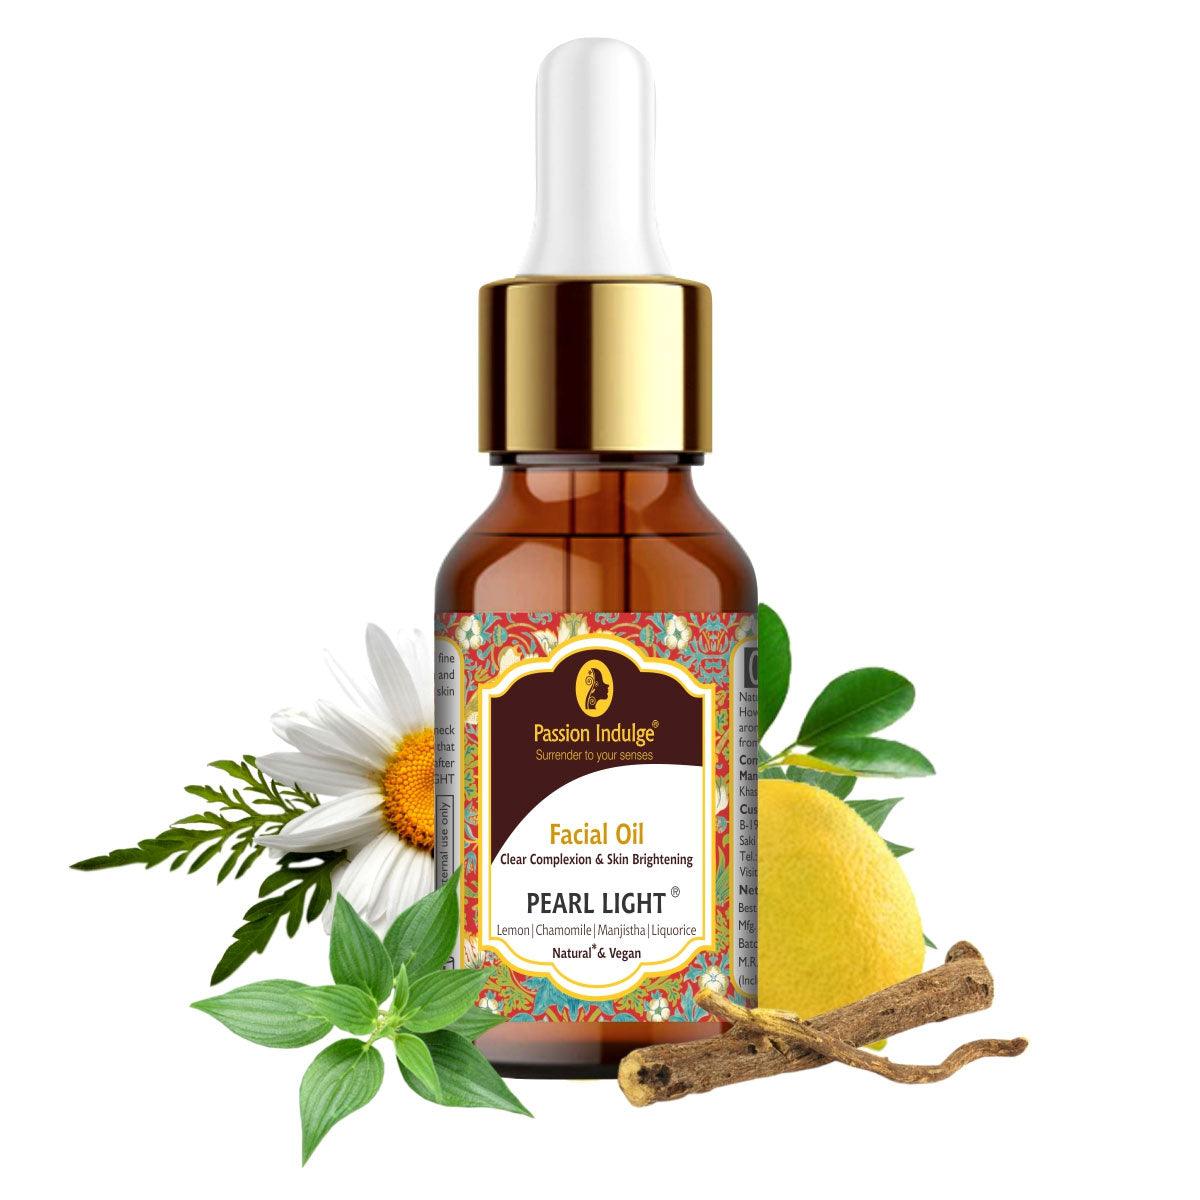 Pearl Light Facial Oil 10ml For Spot Reduction | Skin Brightening & lightening | Clear Complexion | Natural & Vegan | Ayurvedic | All Skin Type